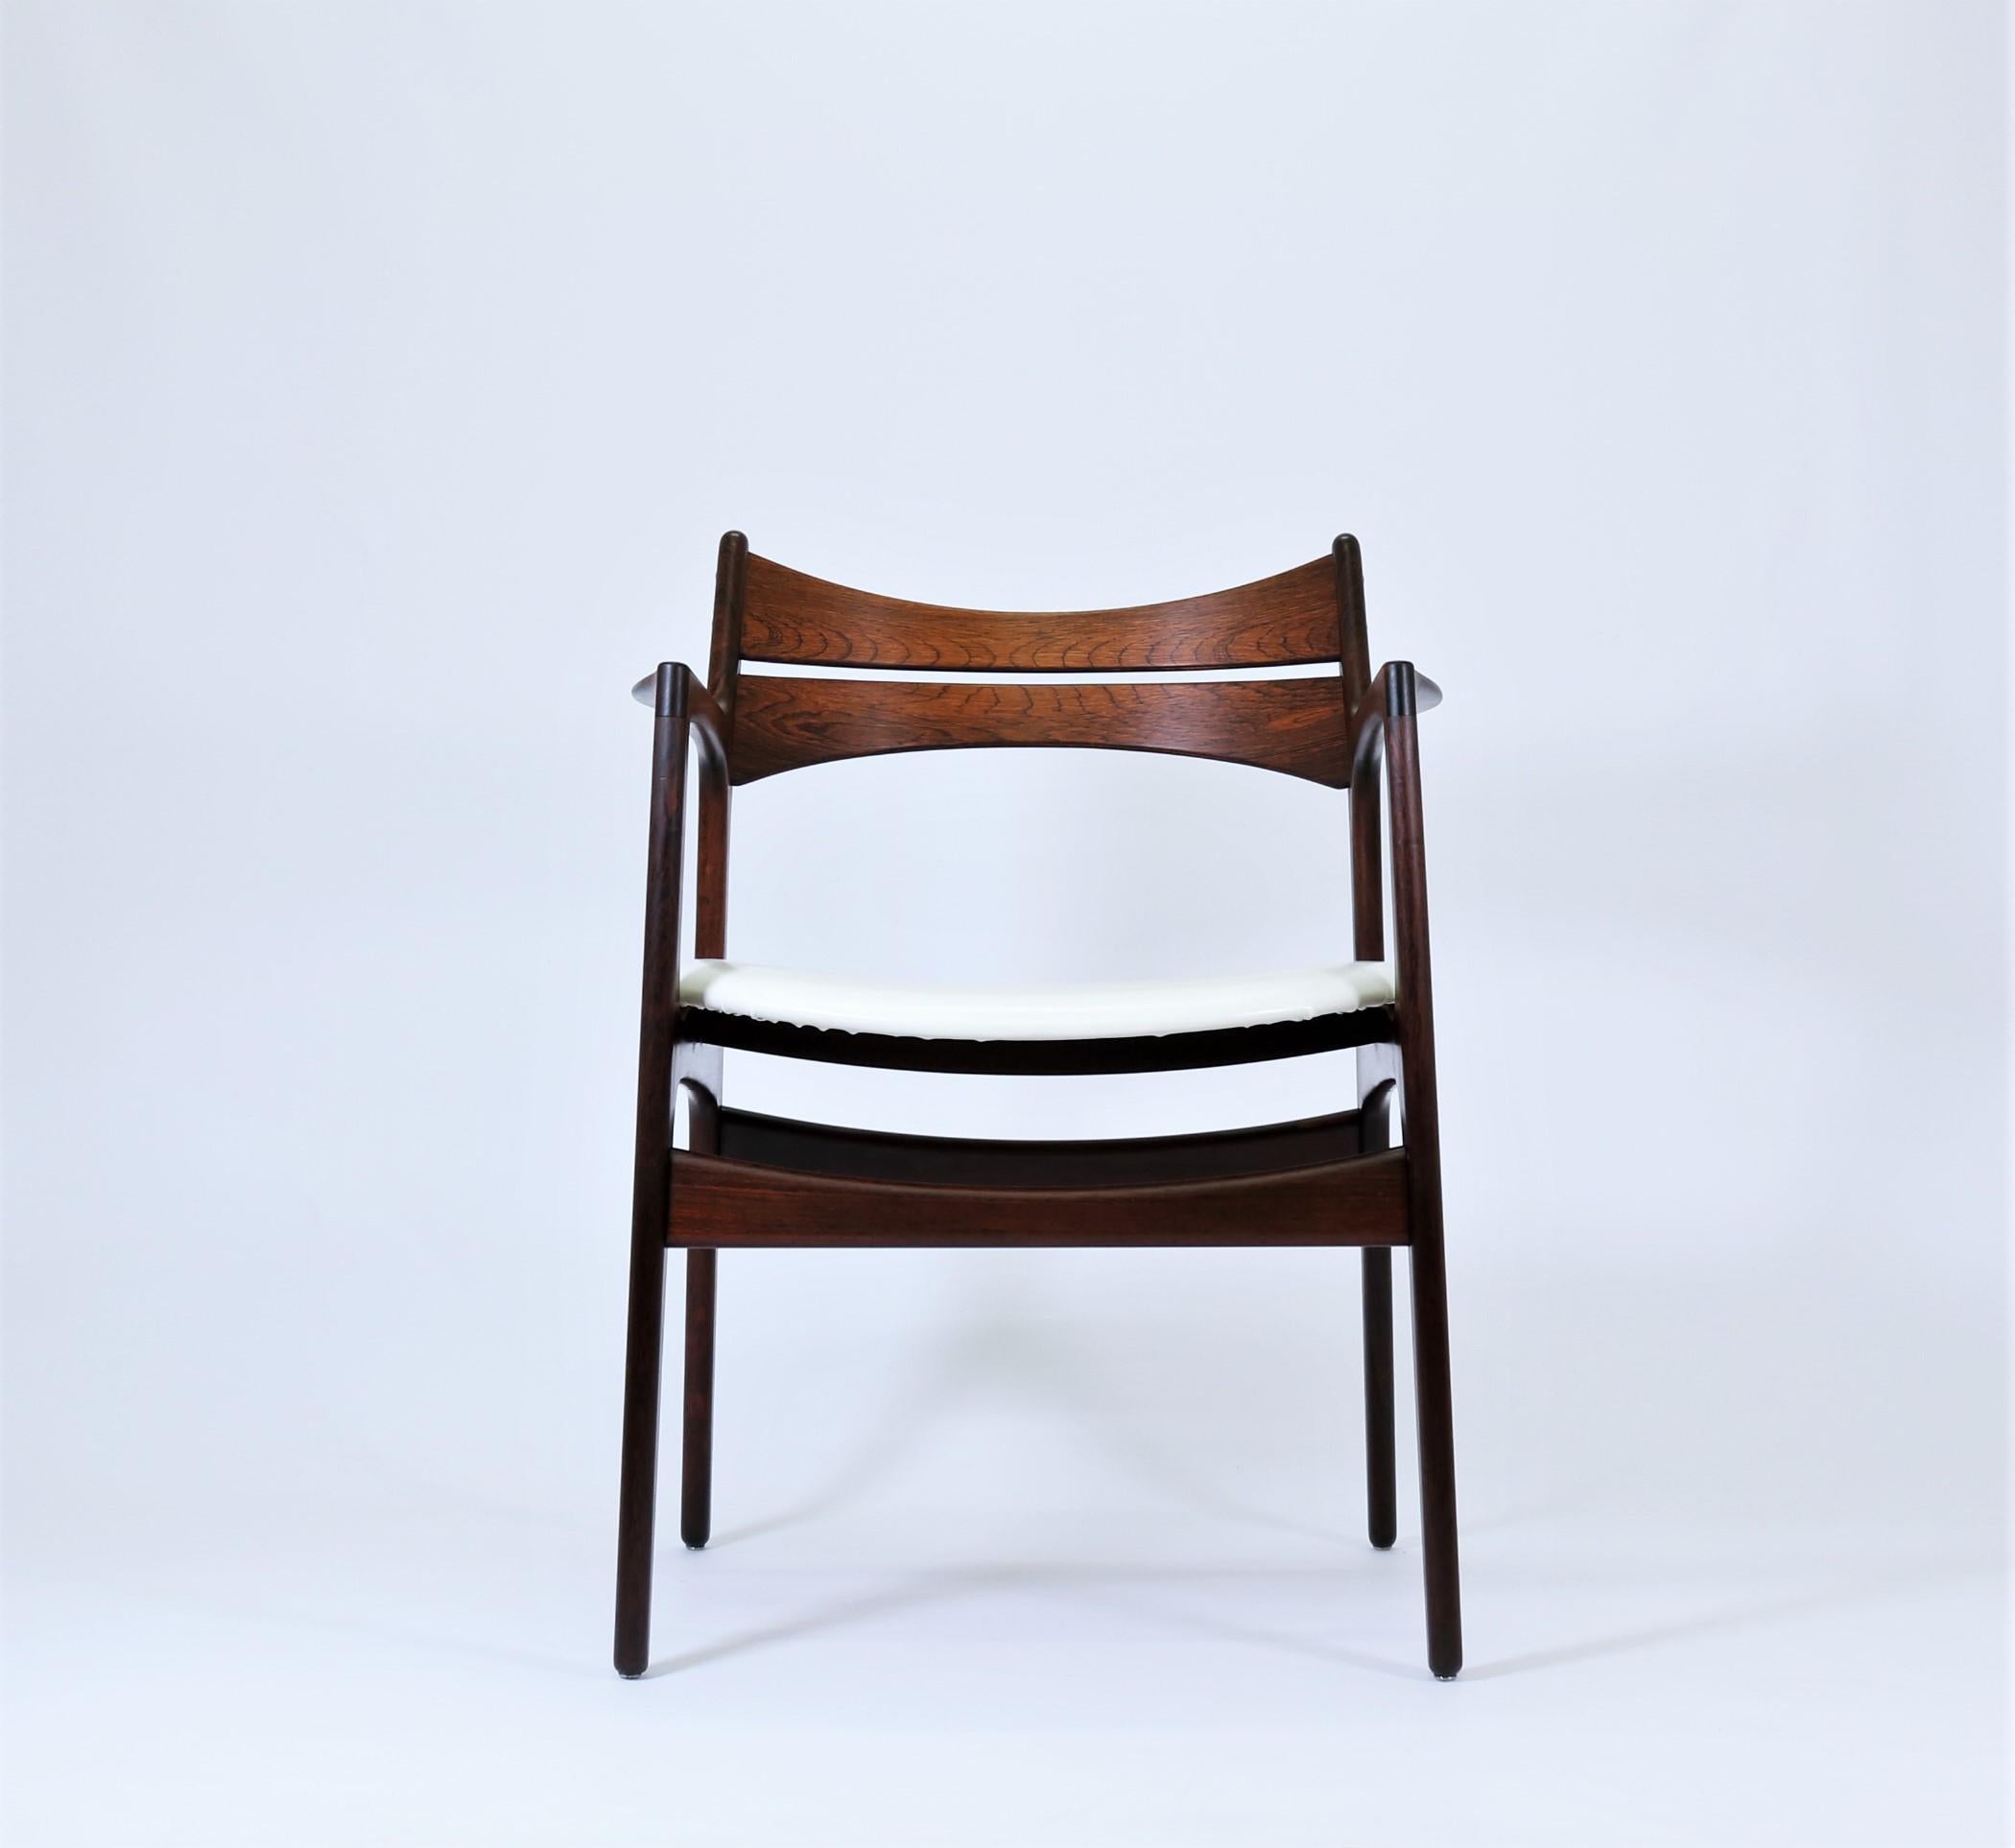 Truly stunning vintage armchair in Brazilian rosewood by renown Danish designer Erik Buck. The chair was made at Chr. Christensen Møbelfabrik in Vamdrup, Denmark in the mid-1960s and is a great example of Danish furniture design from the period. It